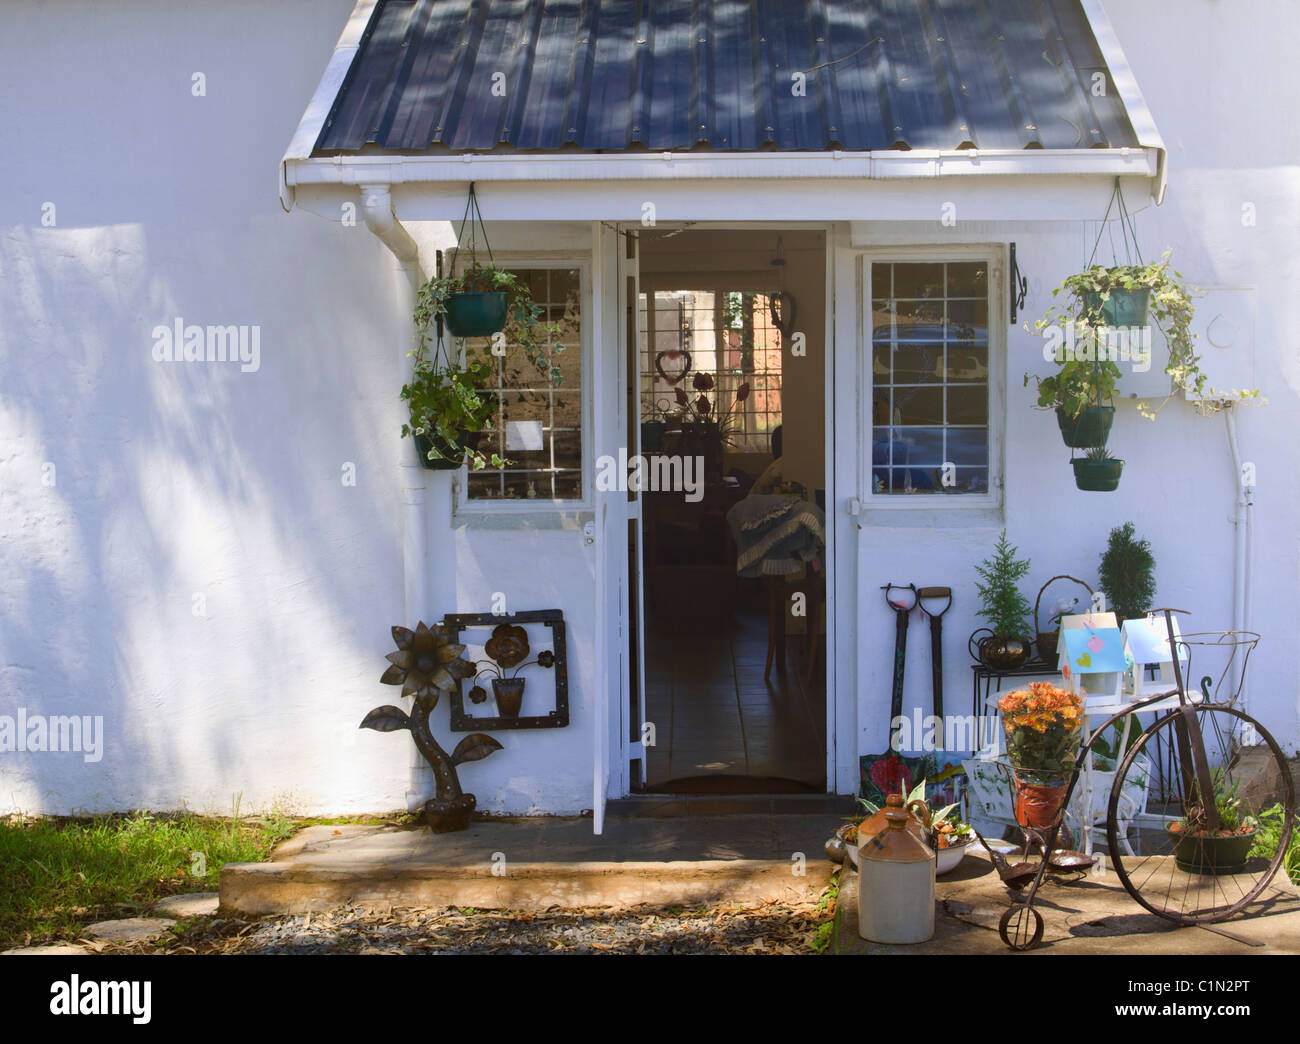 Quaint Florist in Howick, South Africa. Midlands, KwaZulu Natal, South Africa. Stock Photo